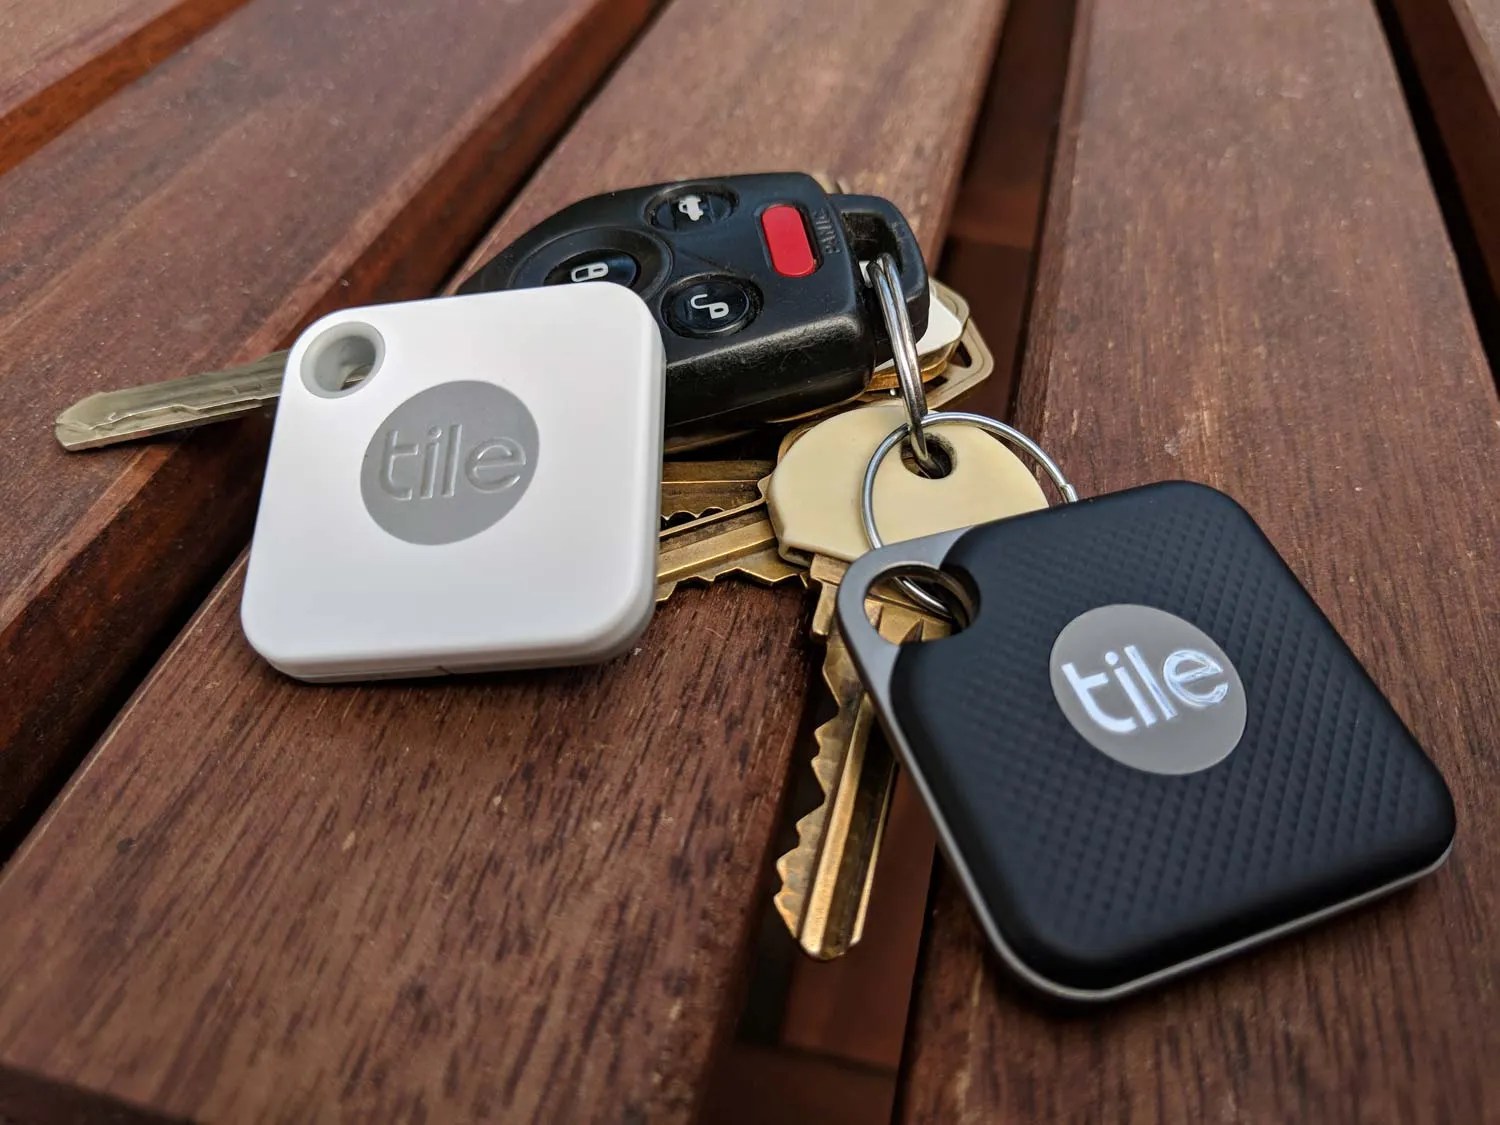 The 5 Best Key Finders You Can Buy in 2022